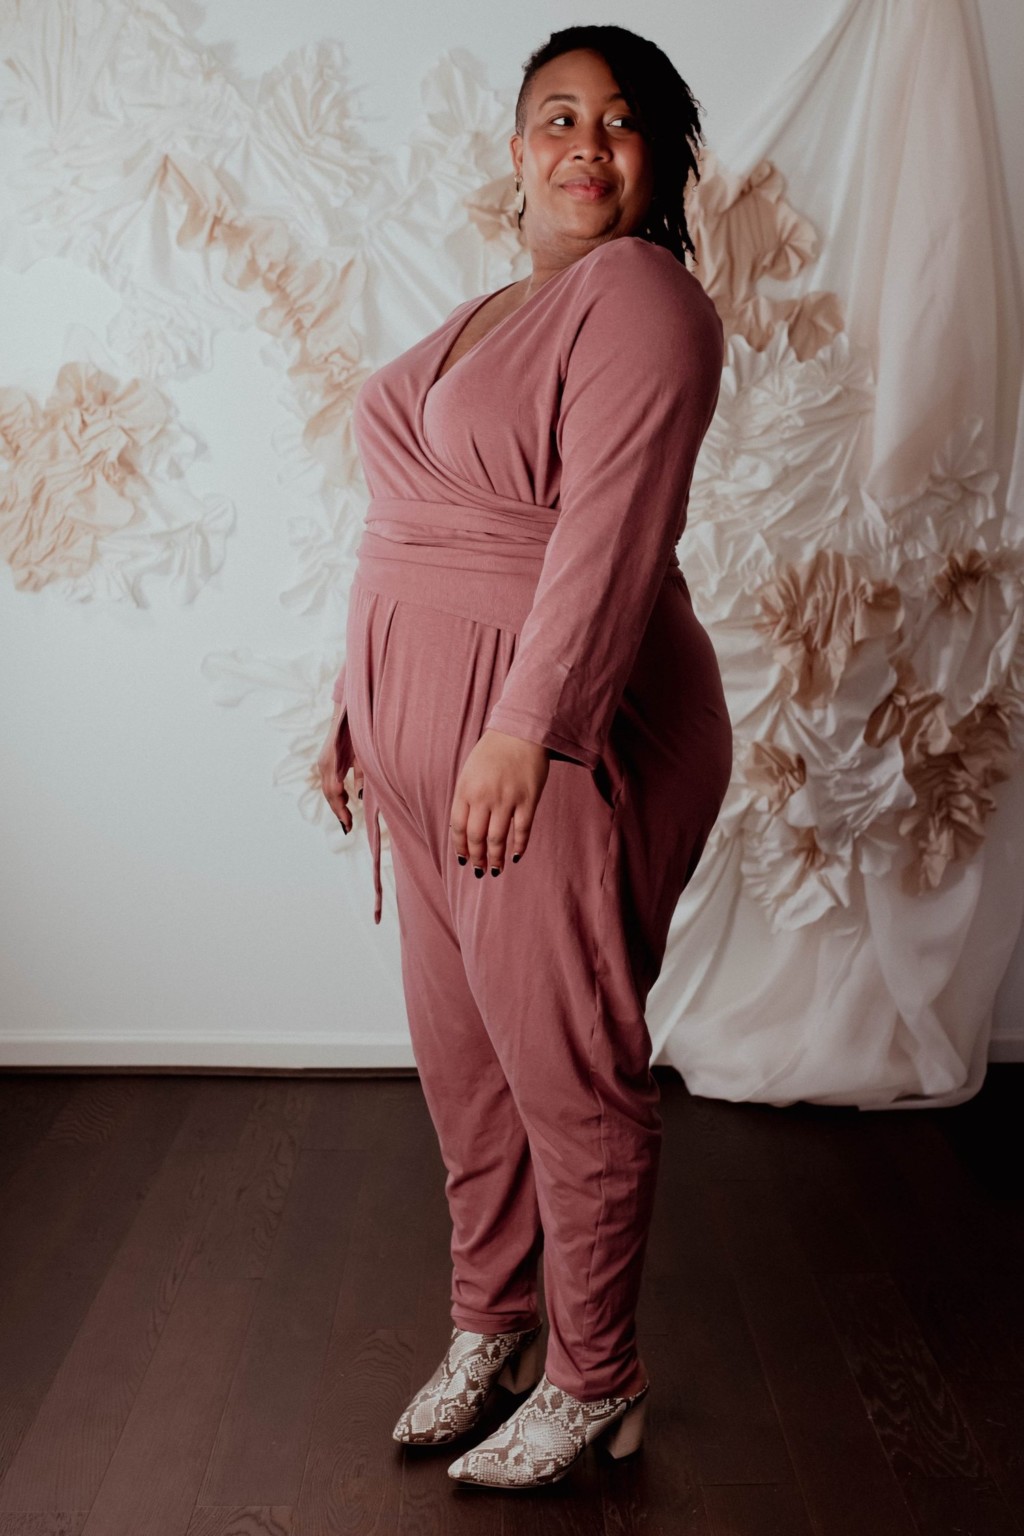 Ashley wears a dusty pink talam jumpsuit, facing to the side at 3/4